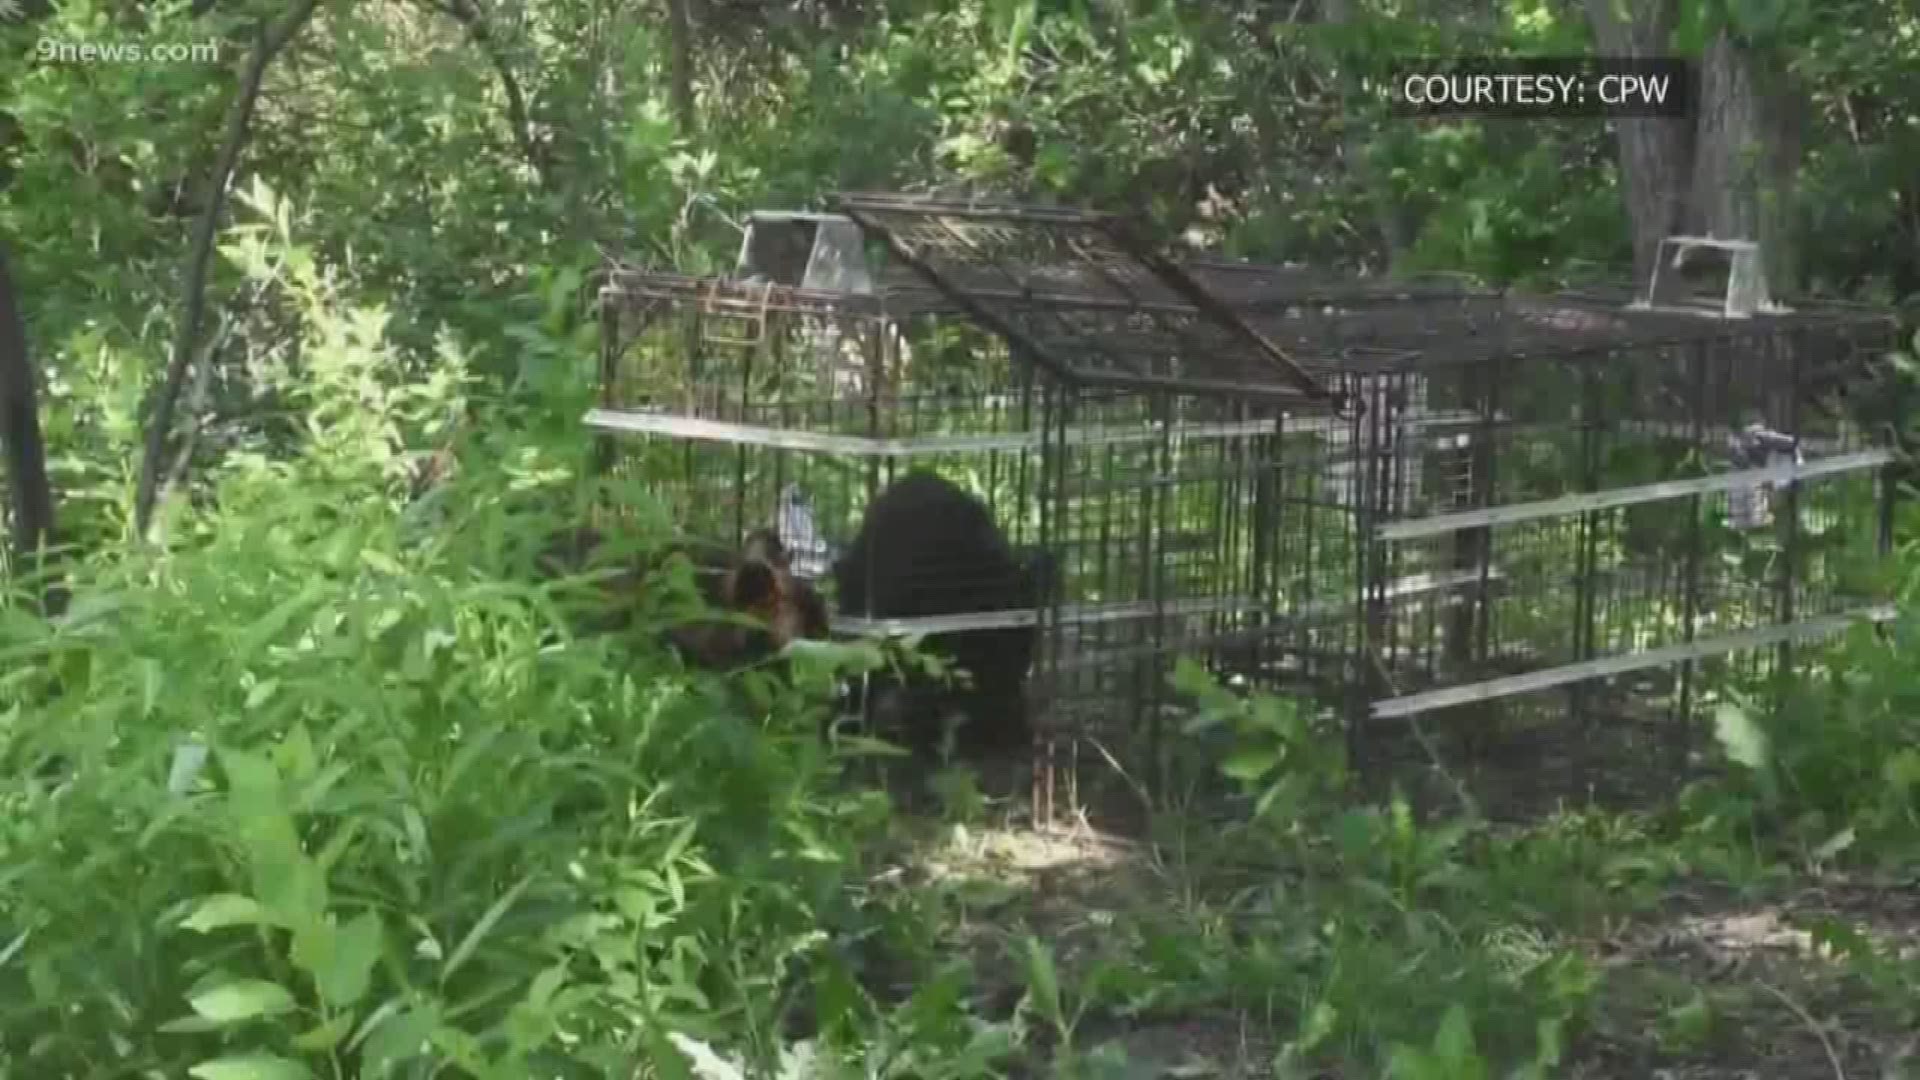 The bear was found dead Friday morning after a resident reported hearing gunshots the day before. 2 orphaned cubs were taken to a rehabilitation center in Del Norte.